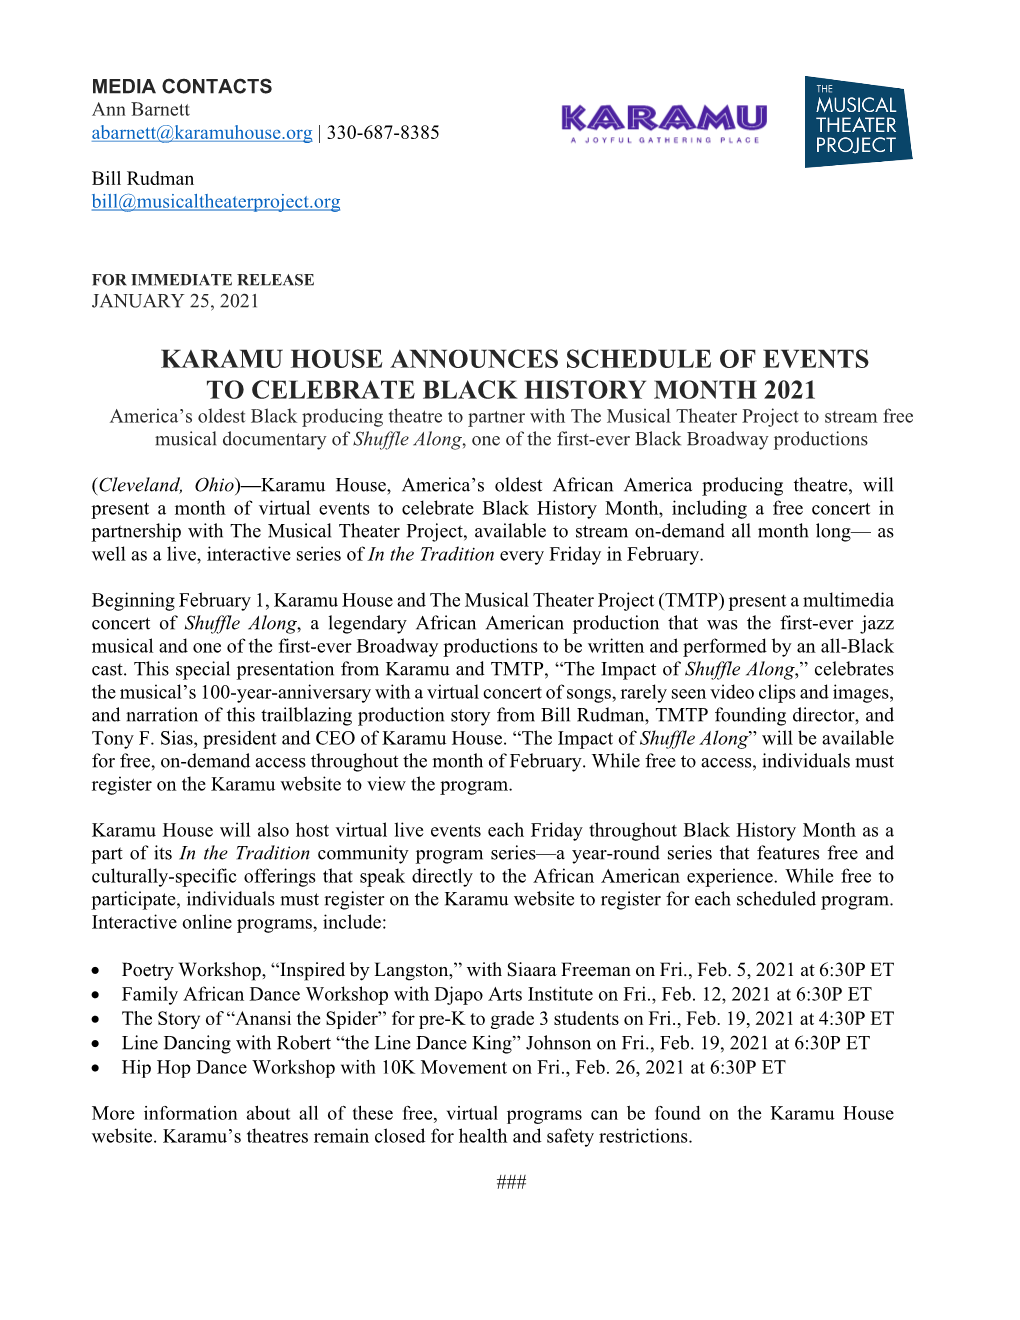 Karamu House Announces Schedule of Events To